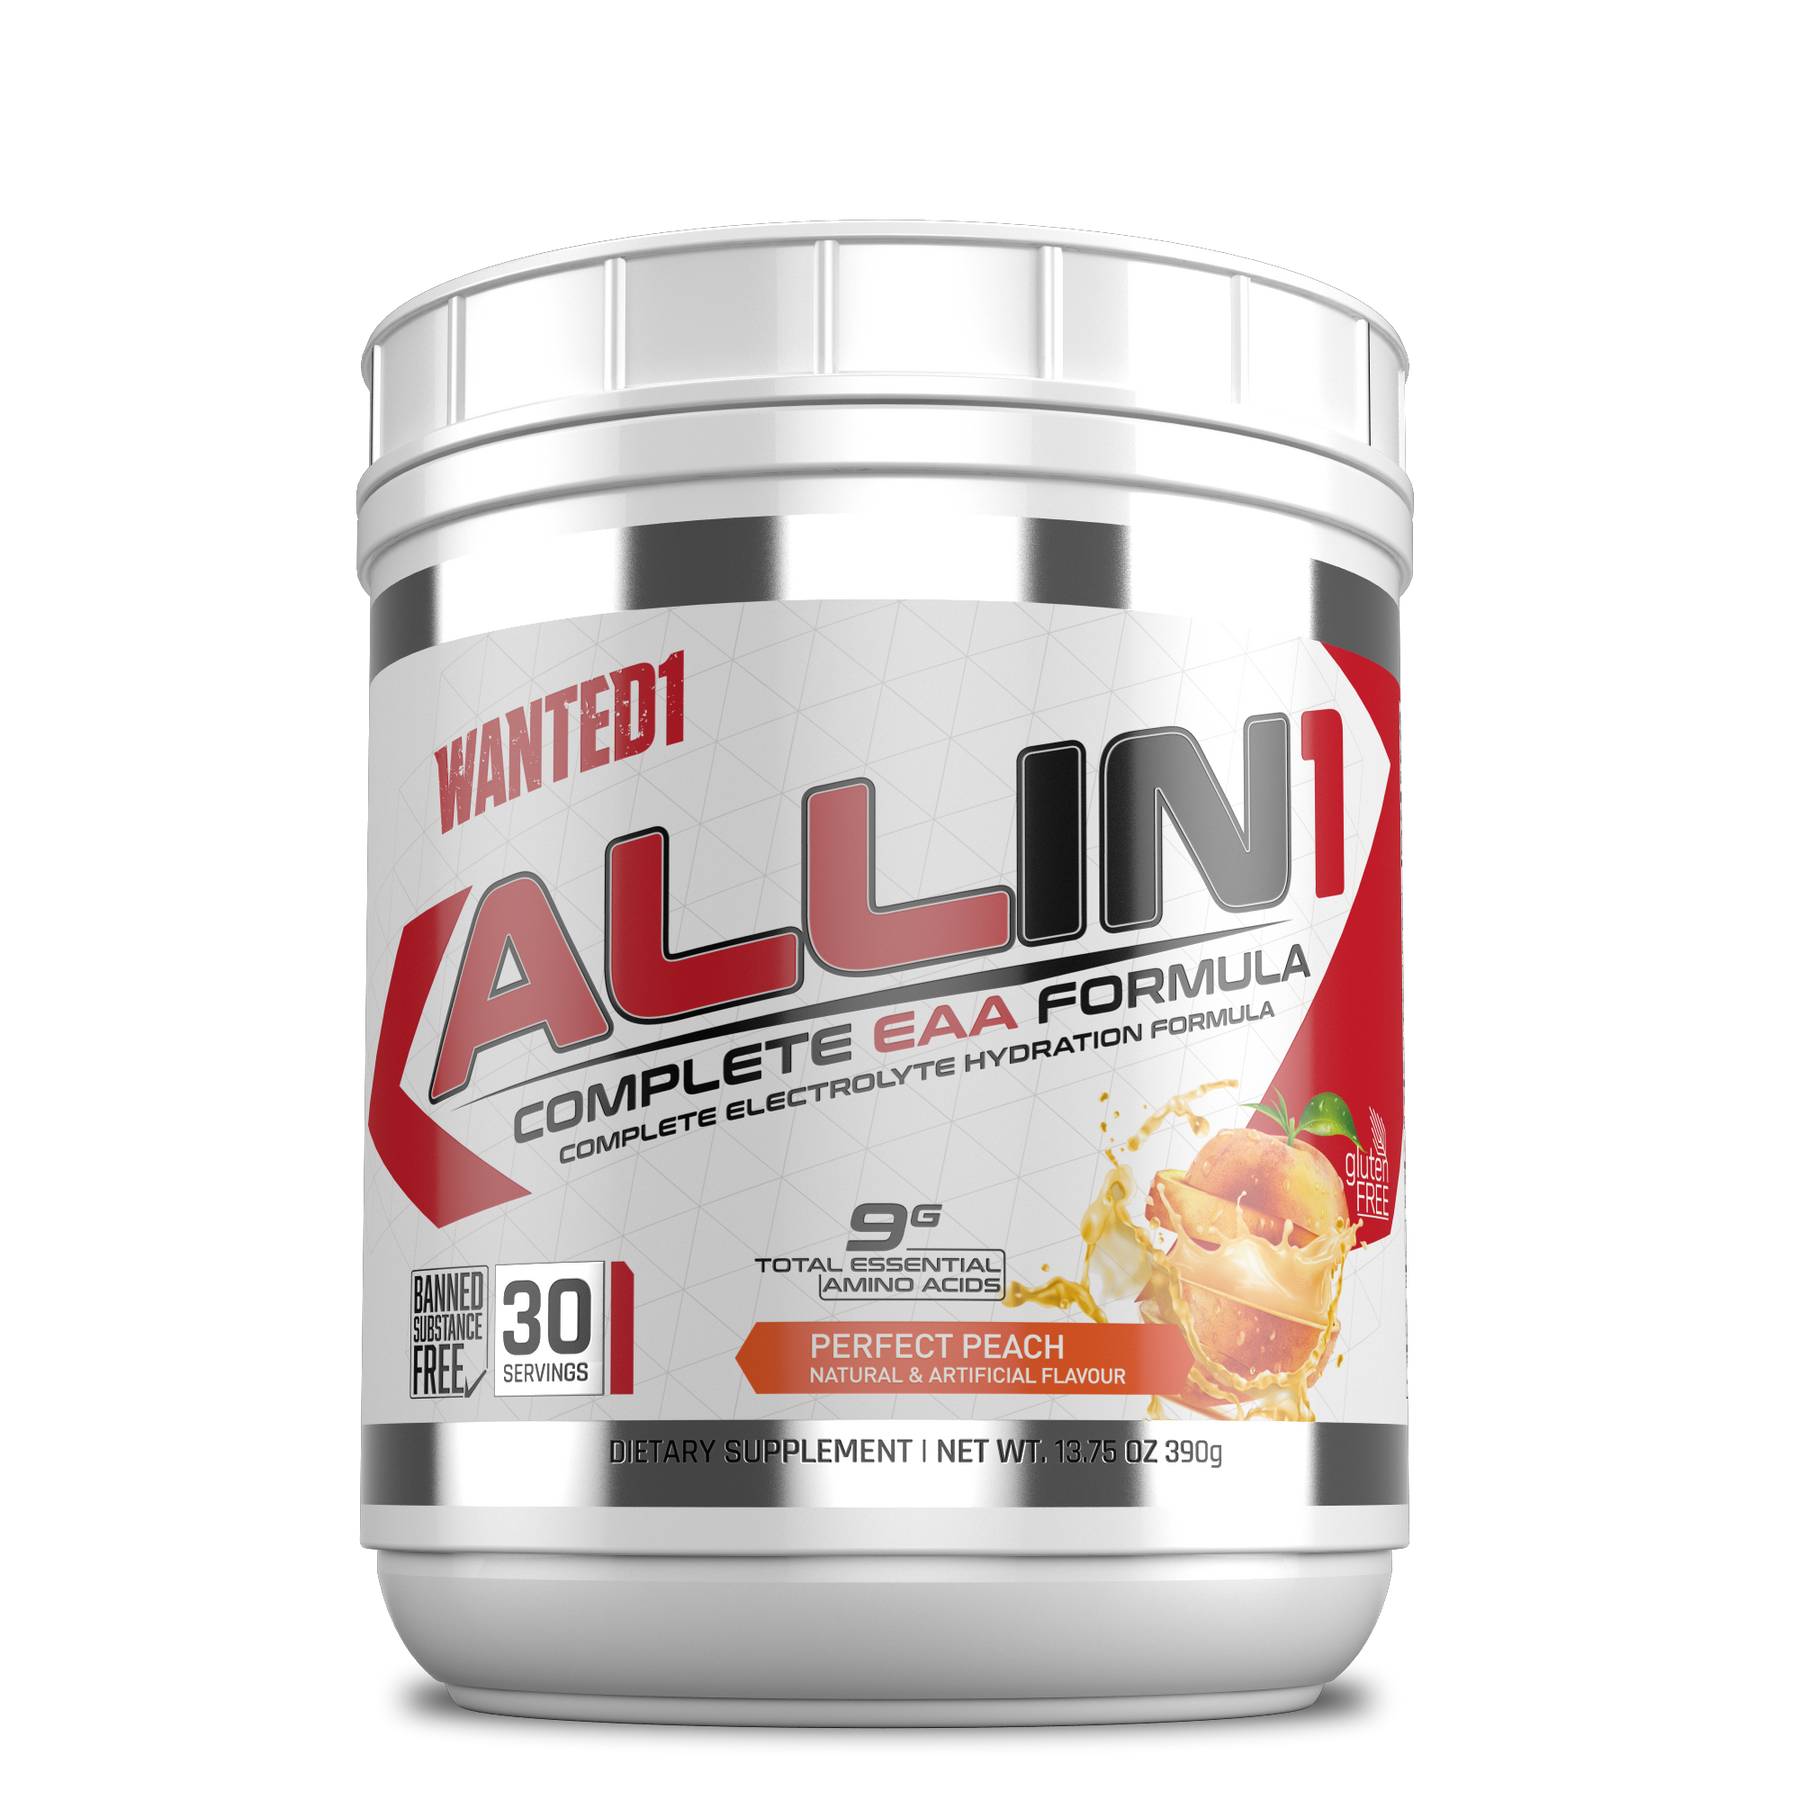 Wanted1 ALLIN1 - Complete EAA's Formula + Electrolytes - 30 serving